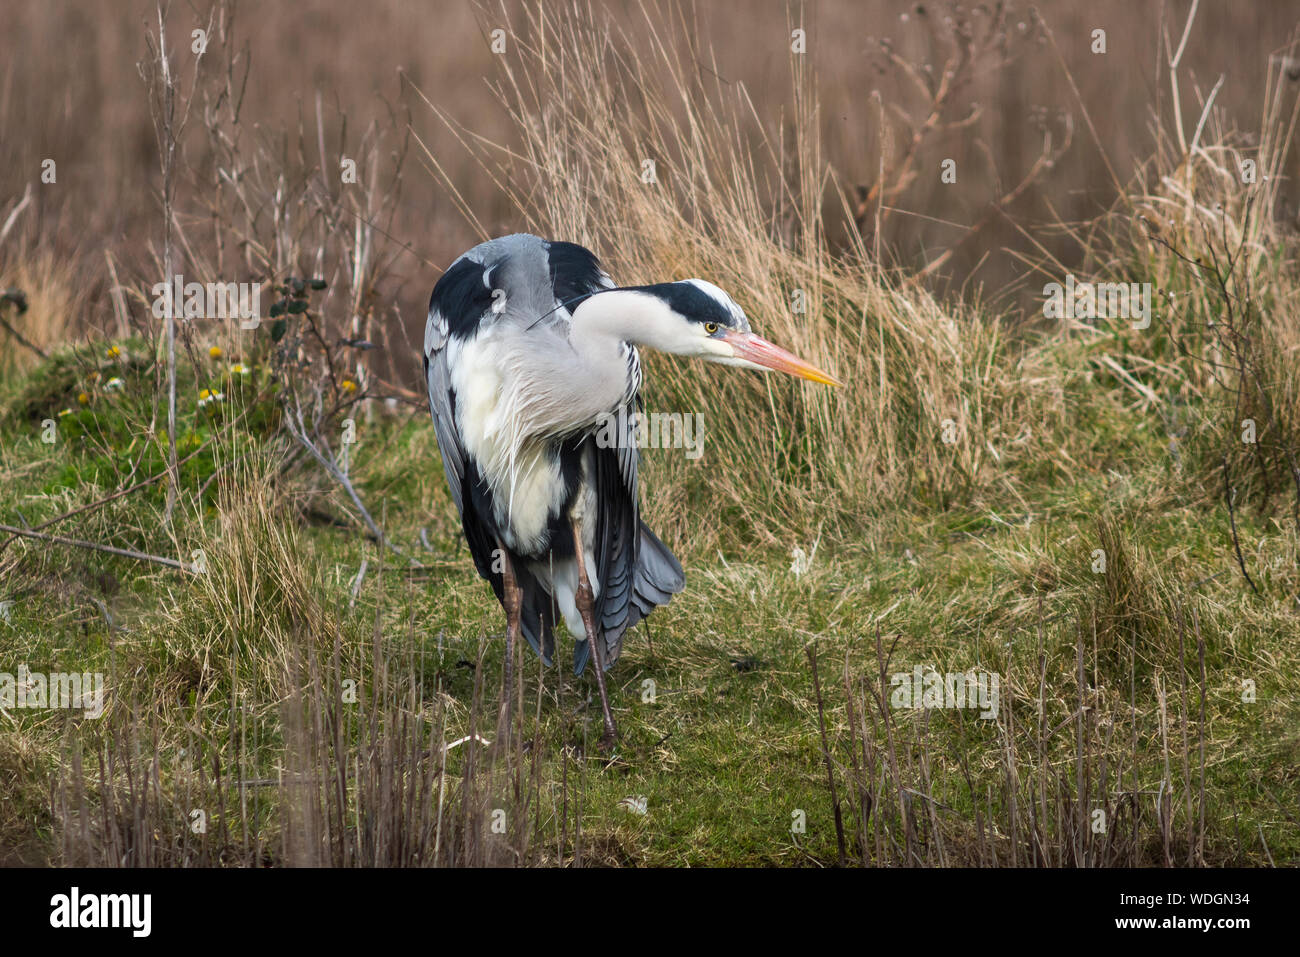 Heron to strike, hunched down with head one side Photo - Alamy